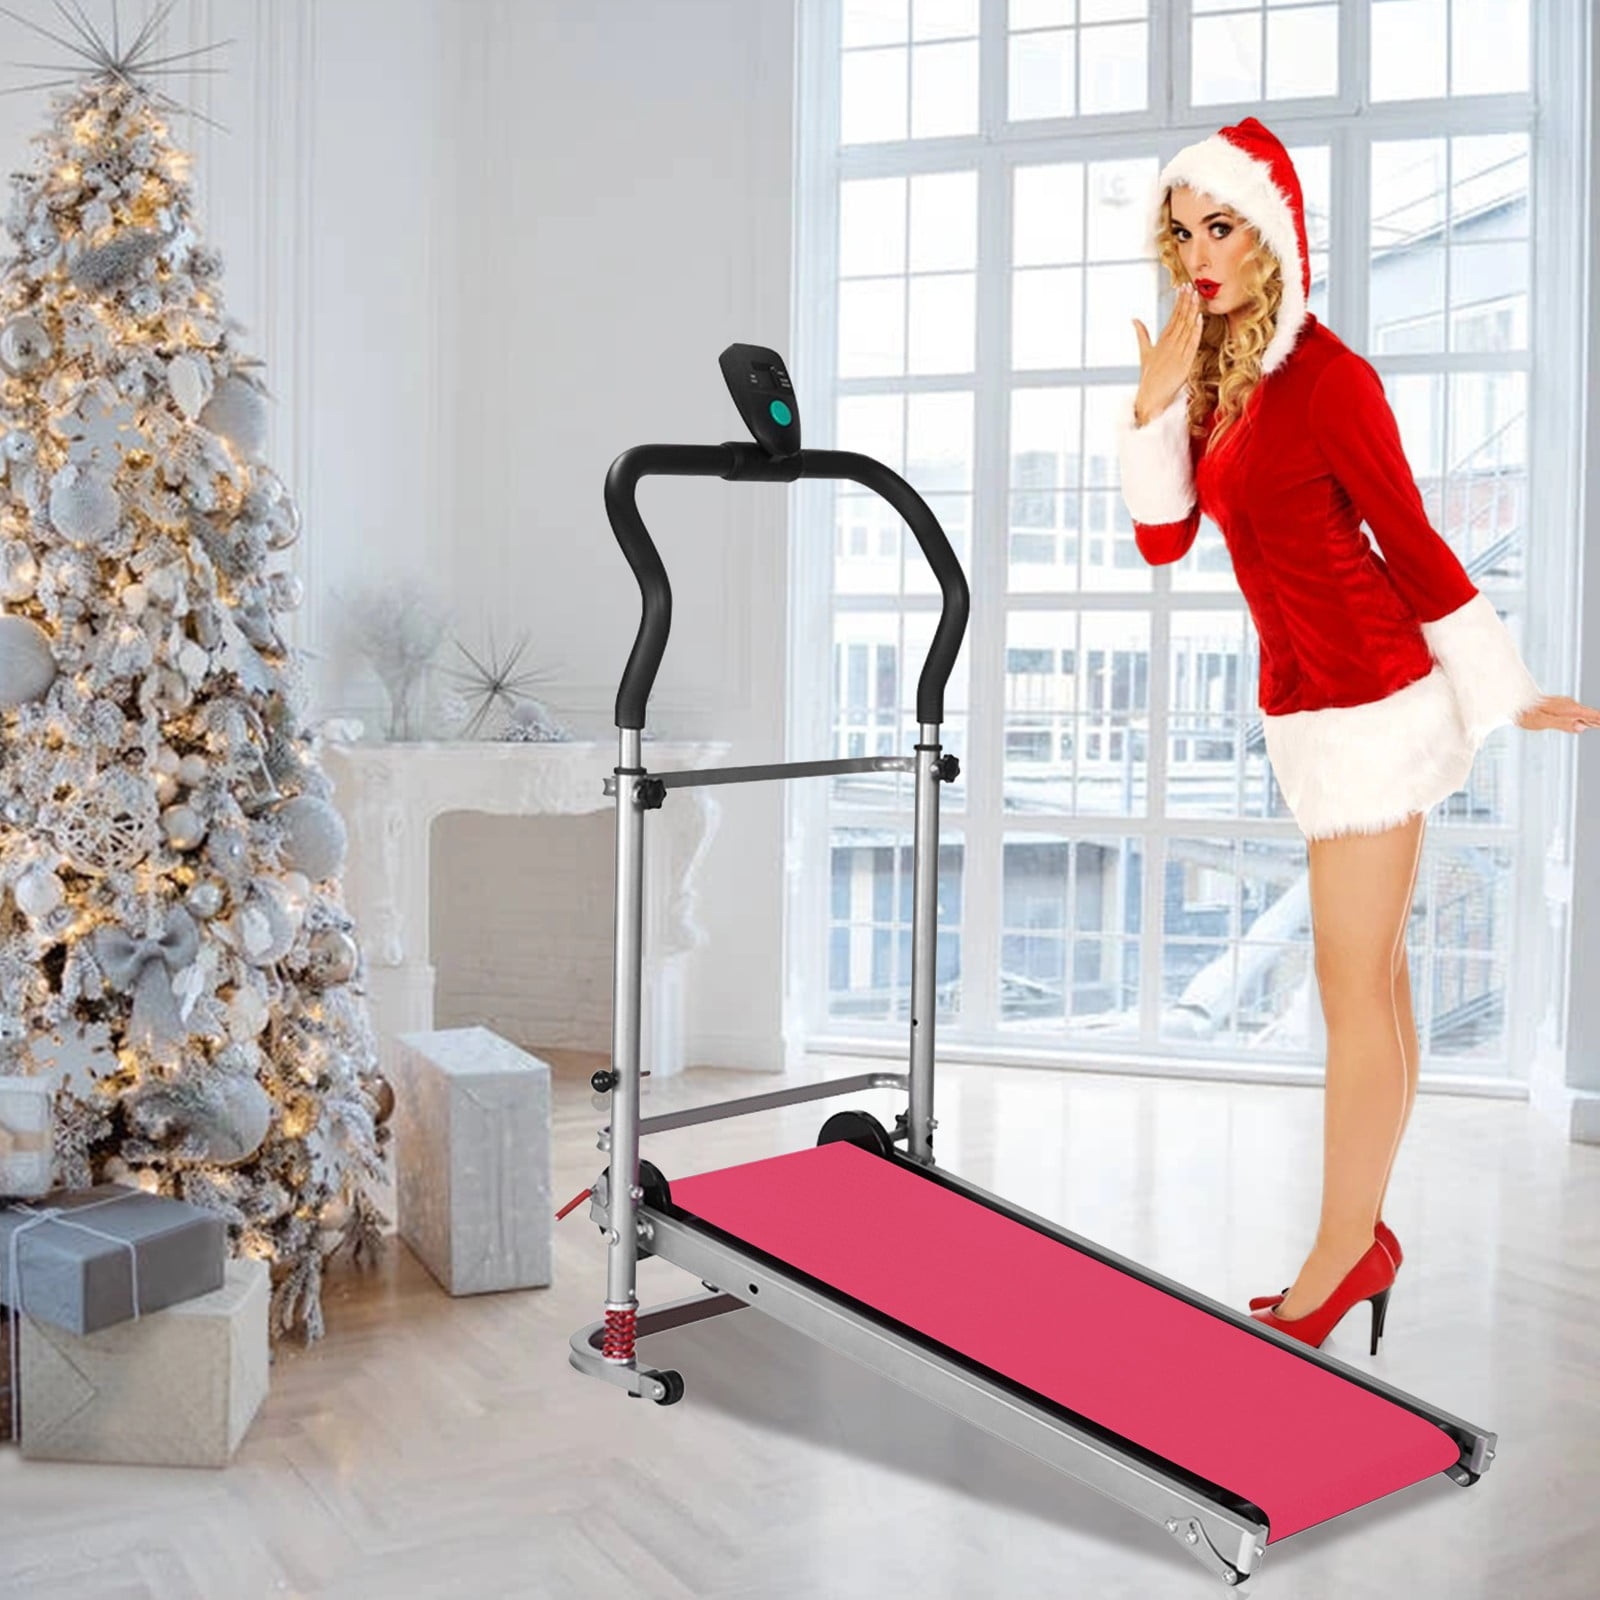 Folding Manual Treadmill Working Machine Fitness Exercise Incline Home Gym Xmas 